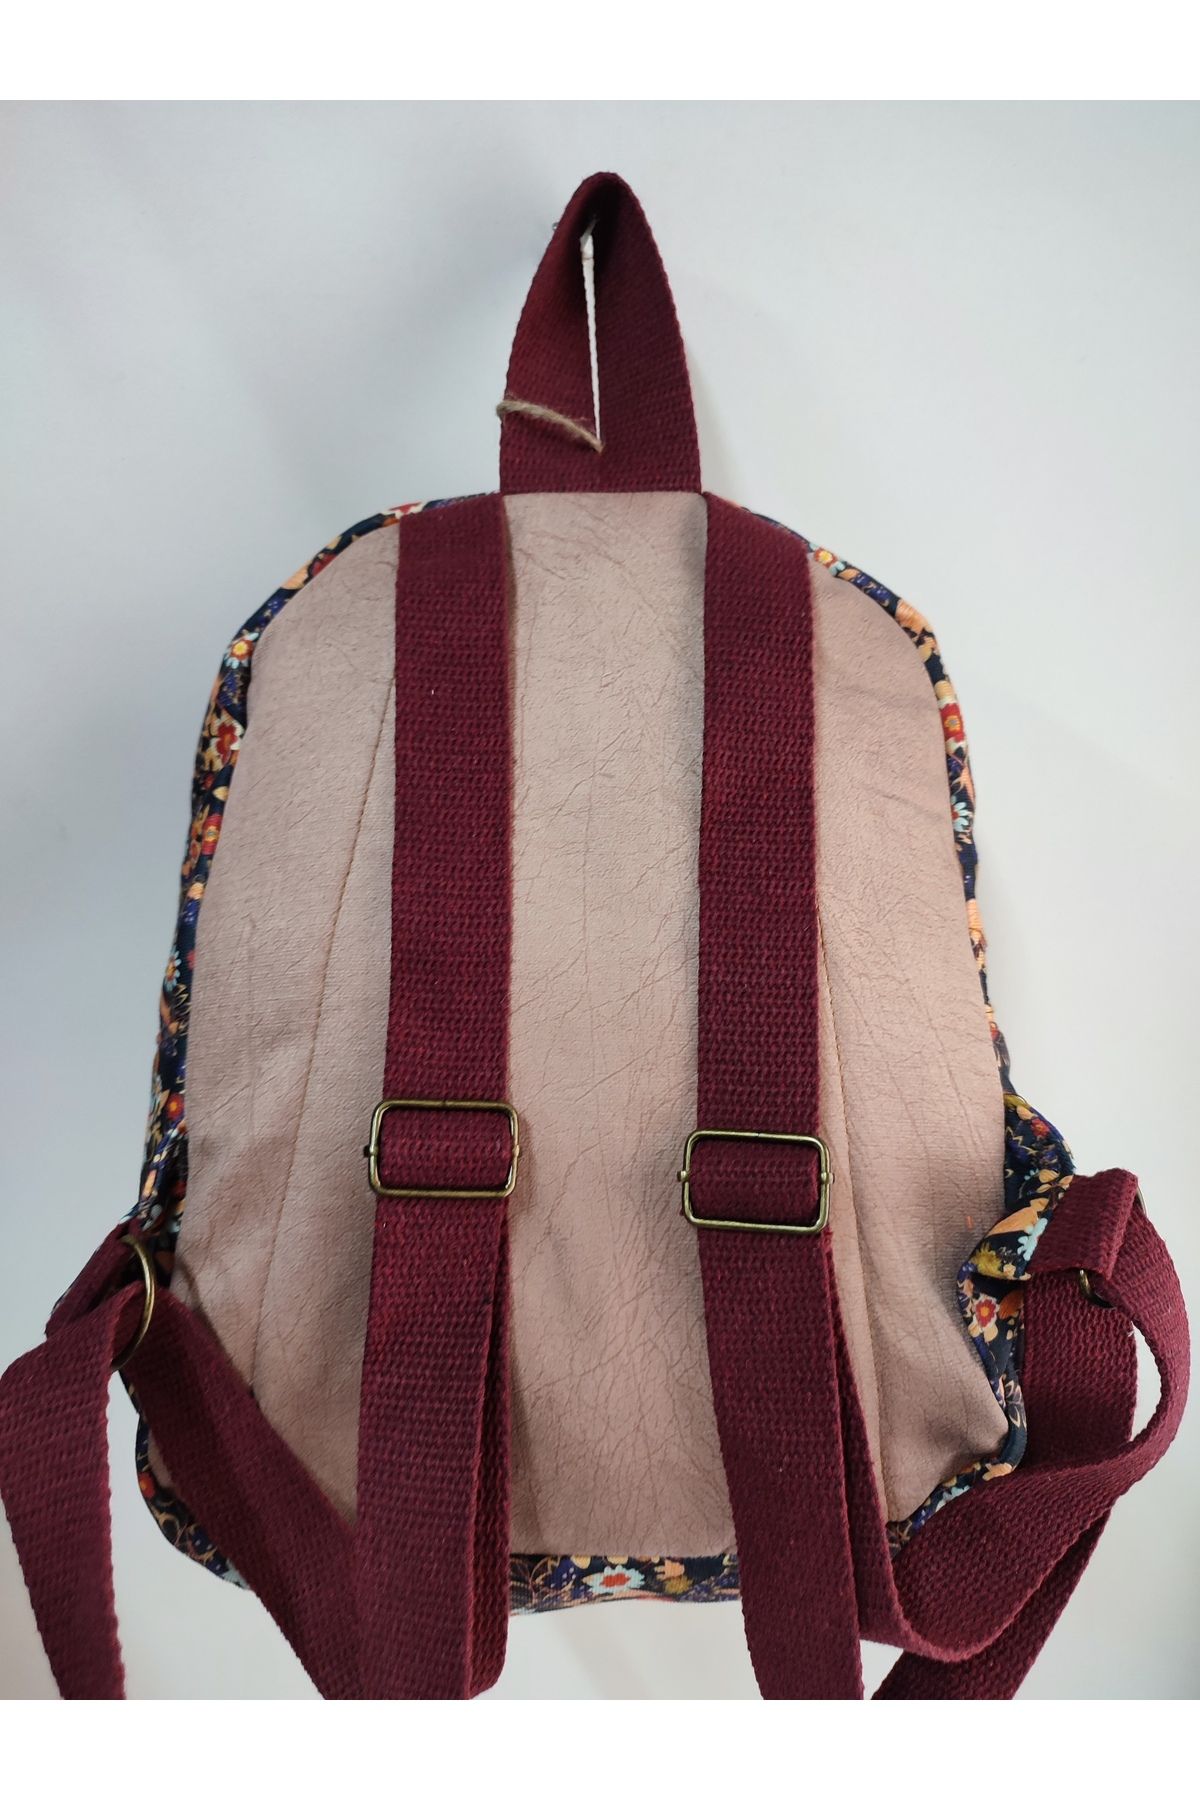 Almolfa Canvas Casual Backpack in Bikaner - Dealers, Manufacturers &  Suppliers - Justdial